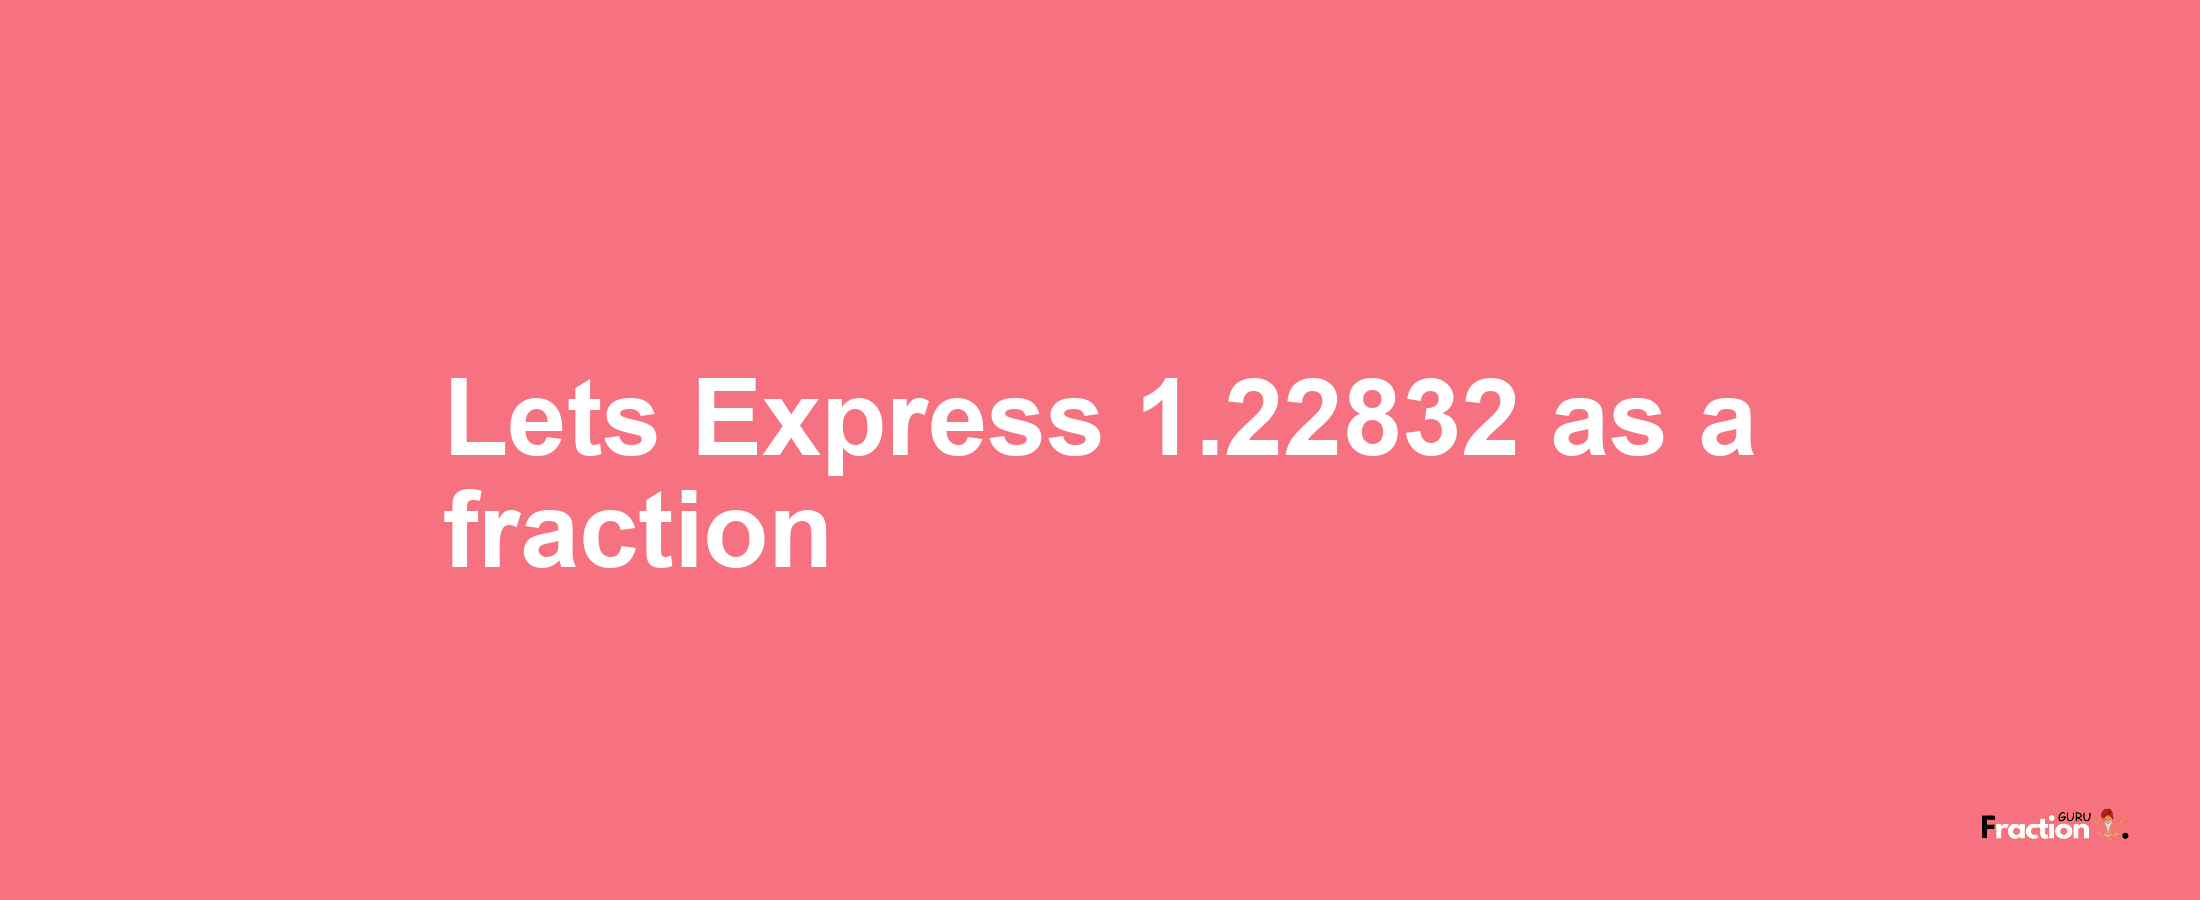 Lets Express 1.22832 as afraction